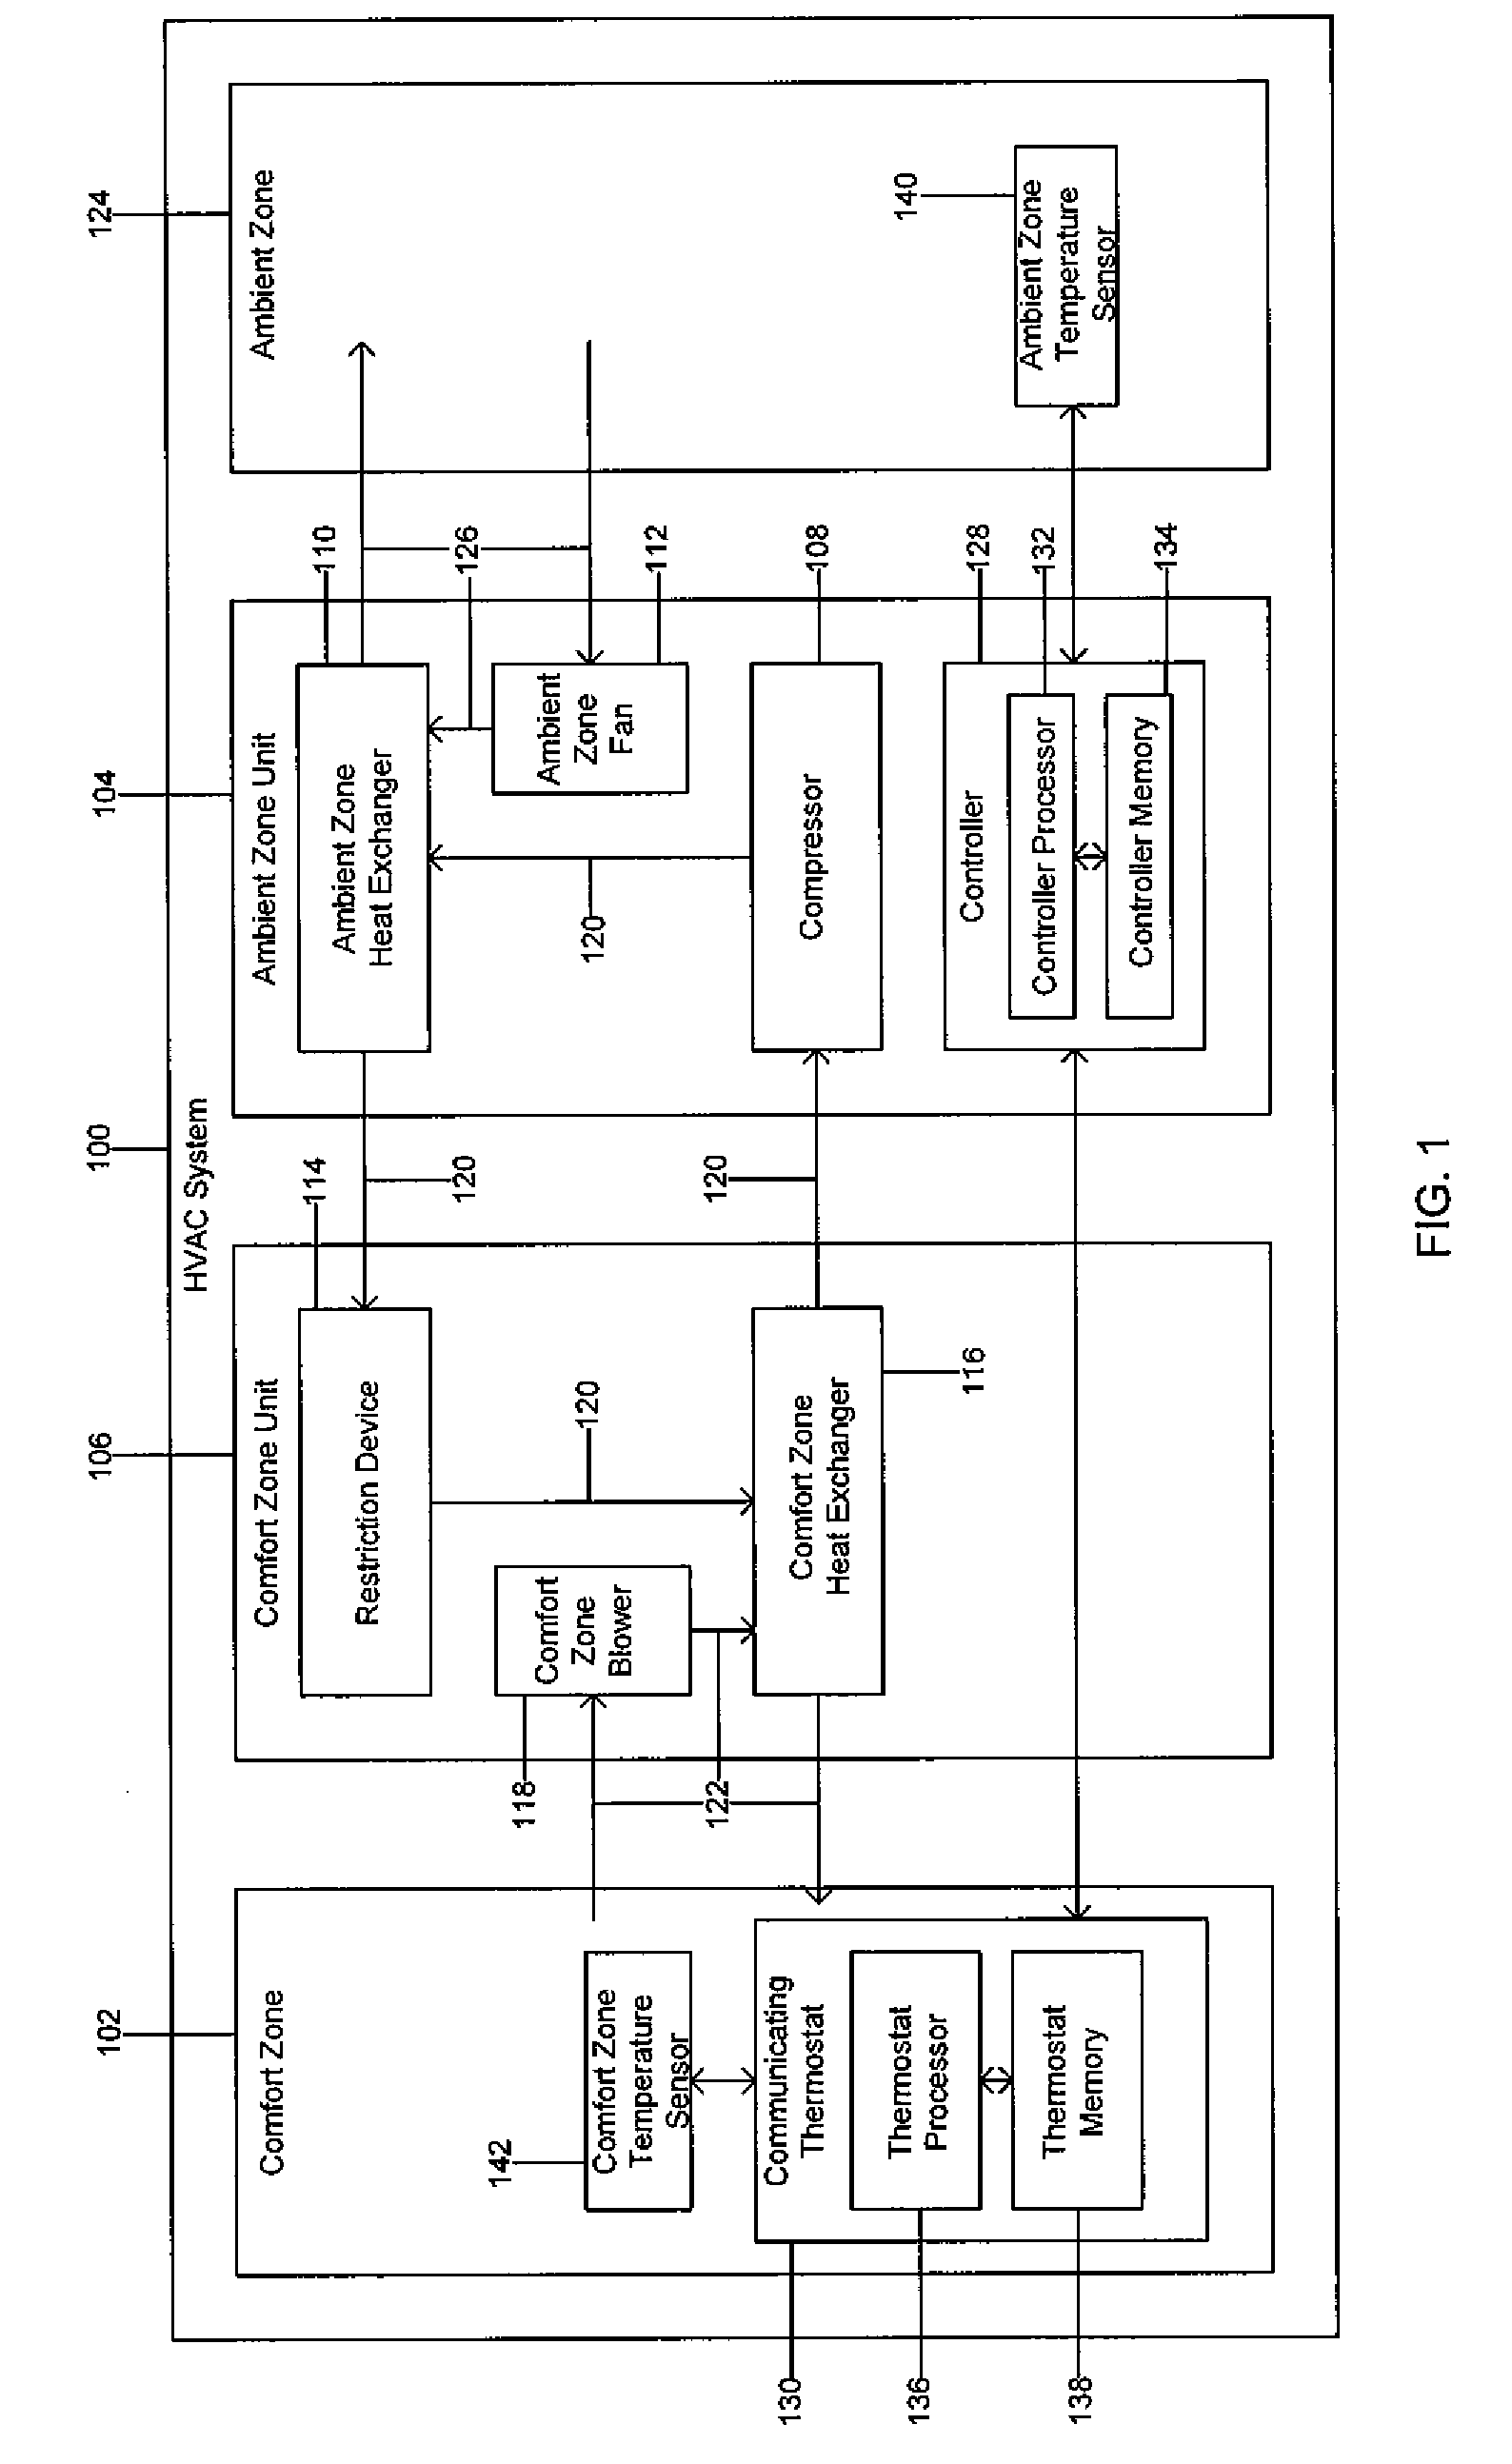 System and Method for Defrost of an HVAC System